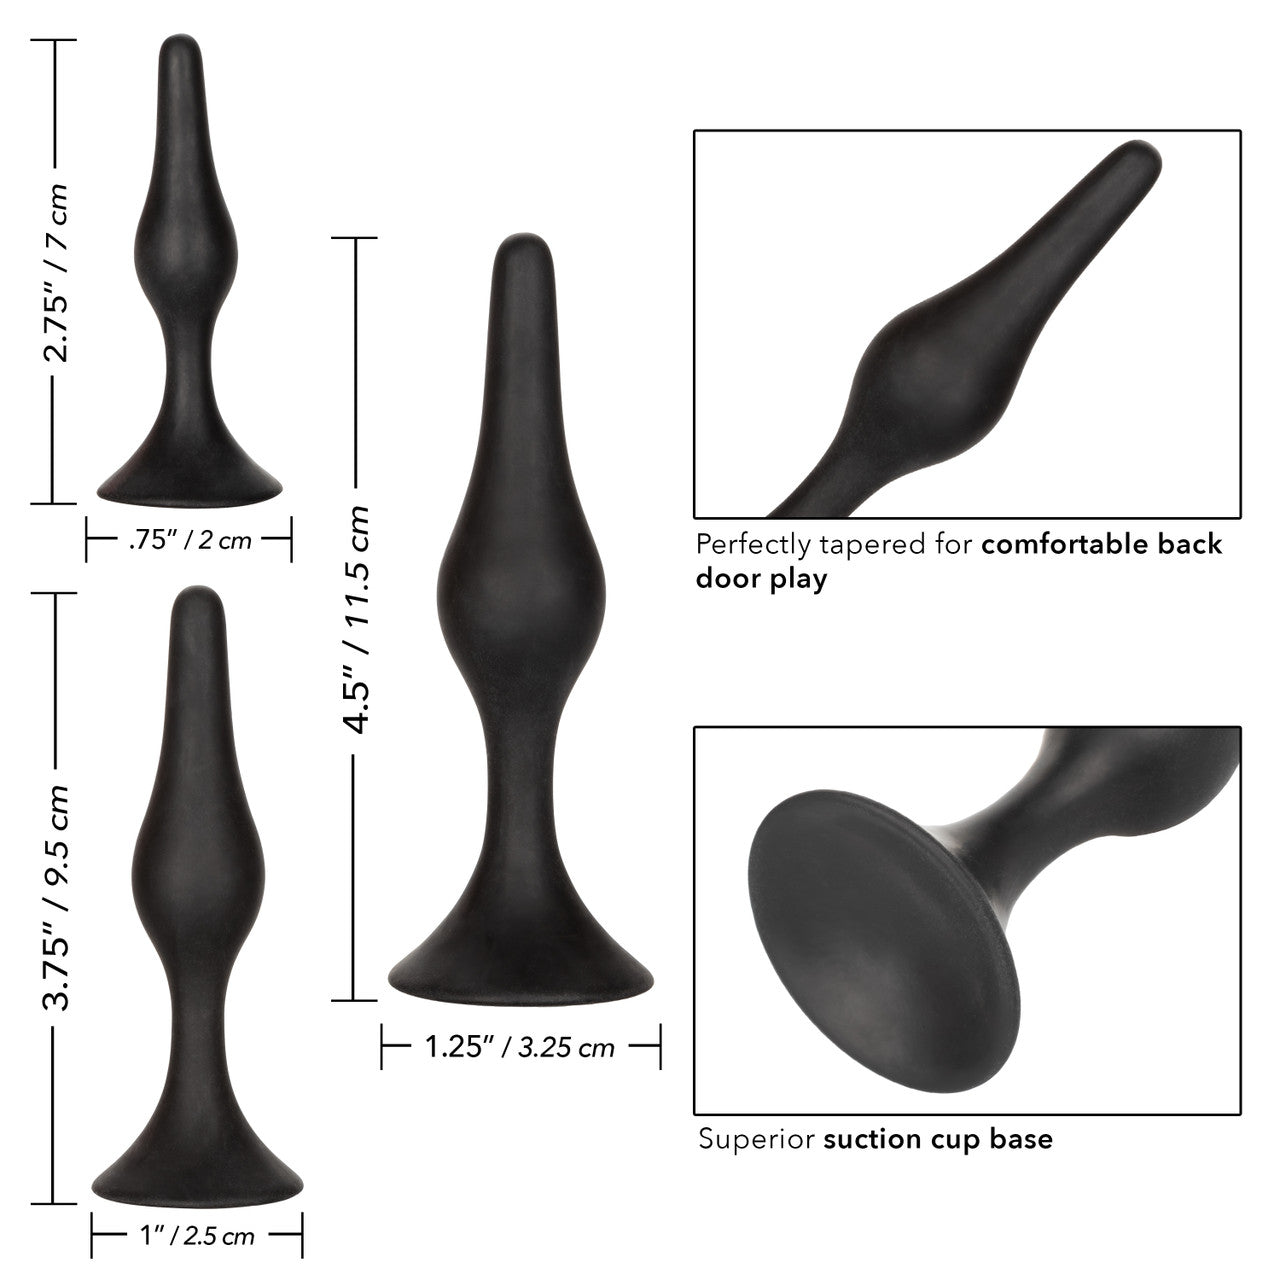 Silicone Anal Starter Kit - Thorn & Feather